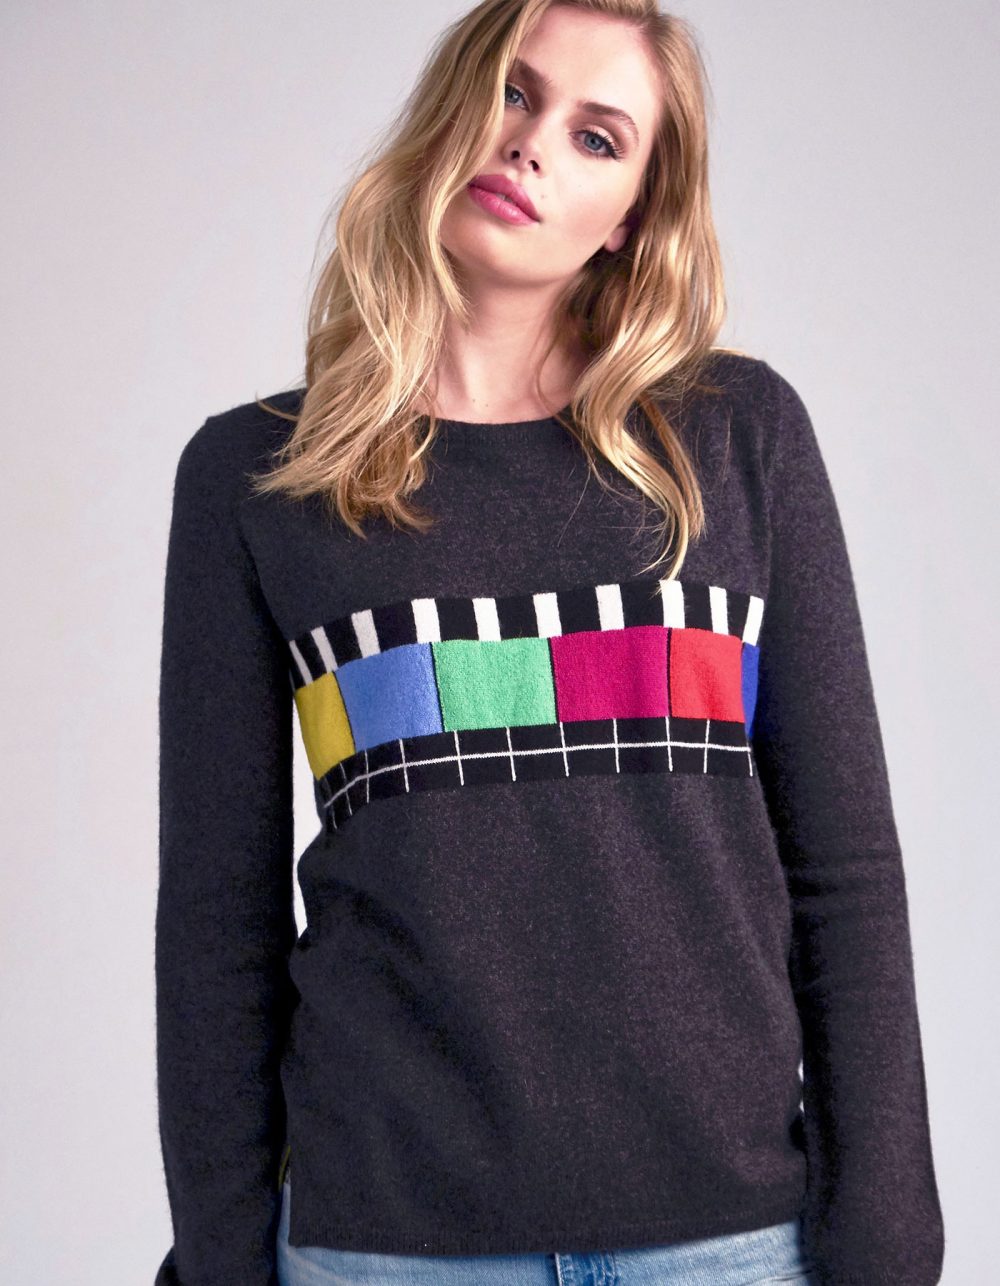 Multi-colour pattern on a charcoal grey cashmere jumper.